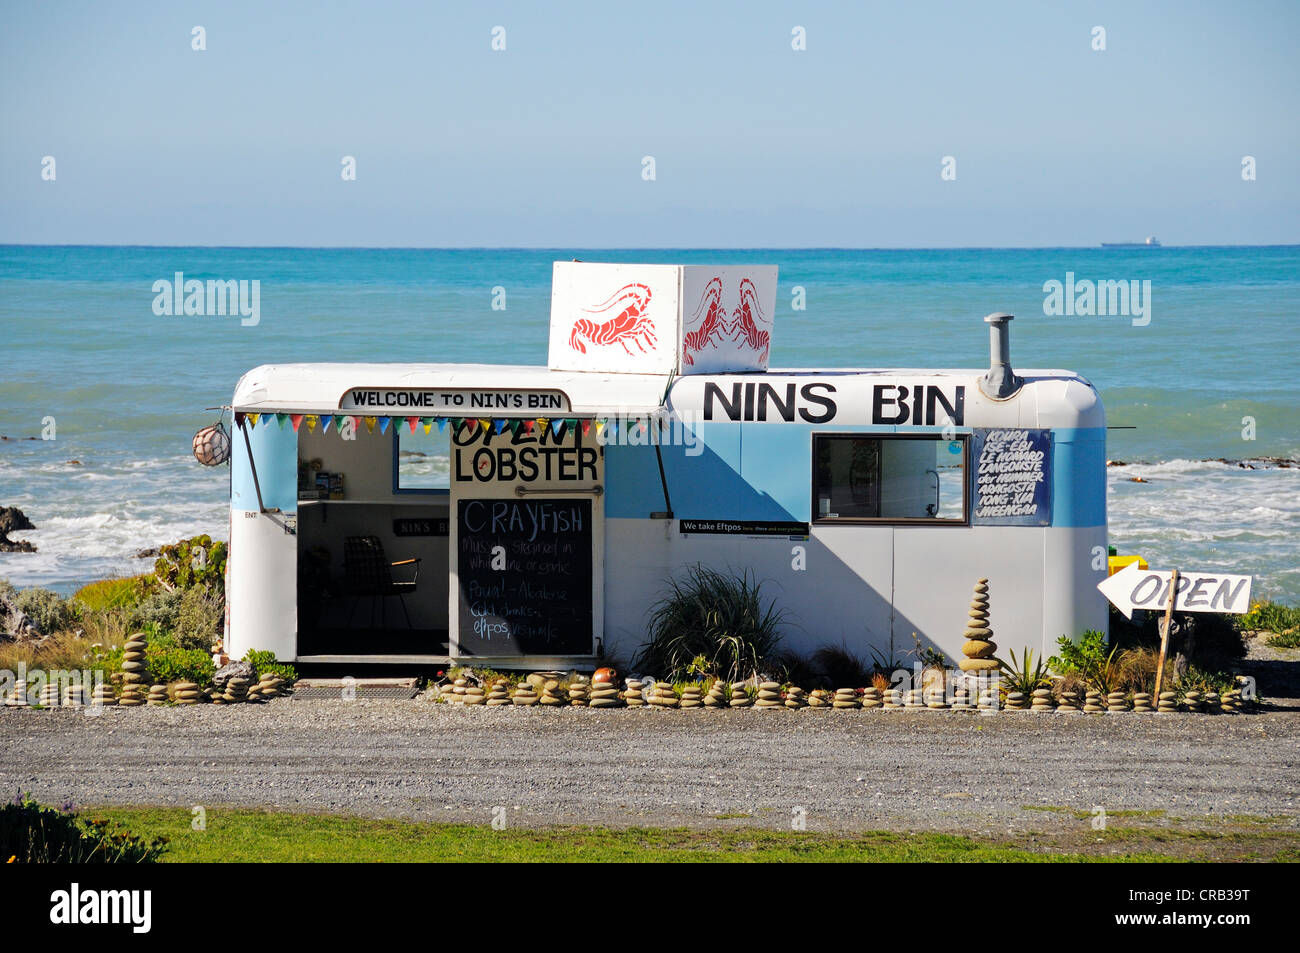 Takeaway offering spiny lobsters, seafood and fish, Kaikoura, South Island, New Zealand Stock Photo